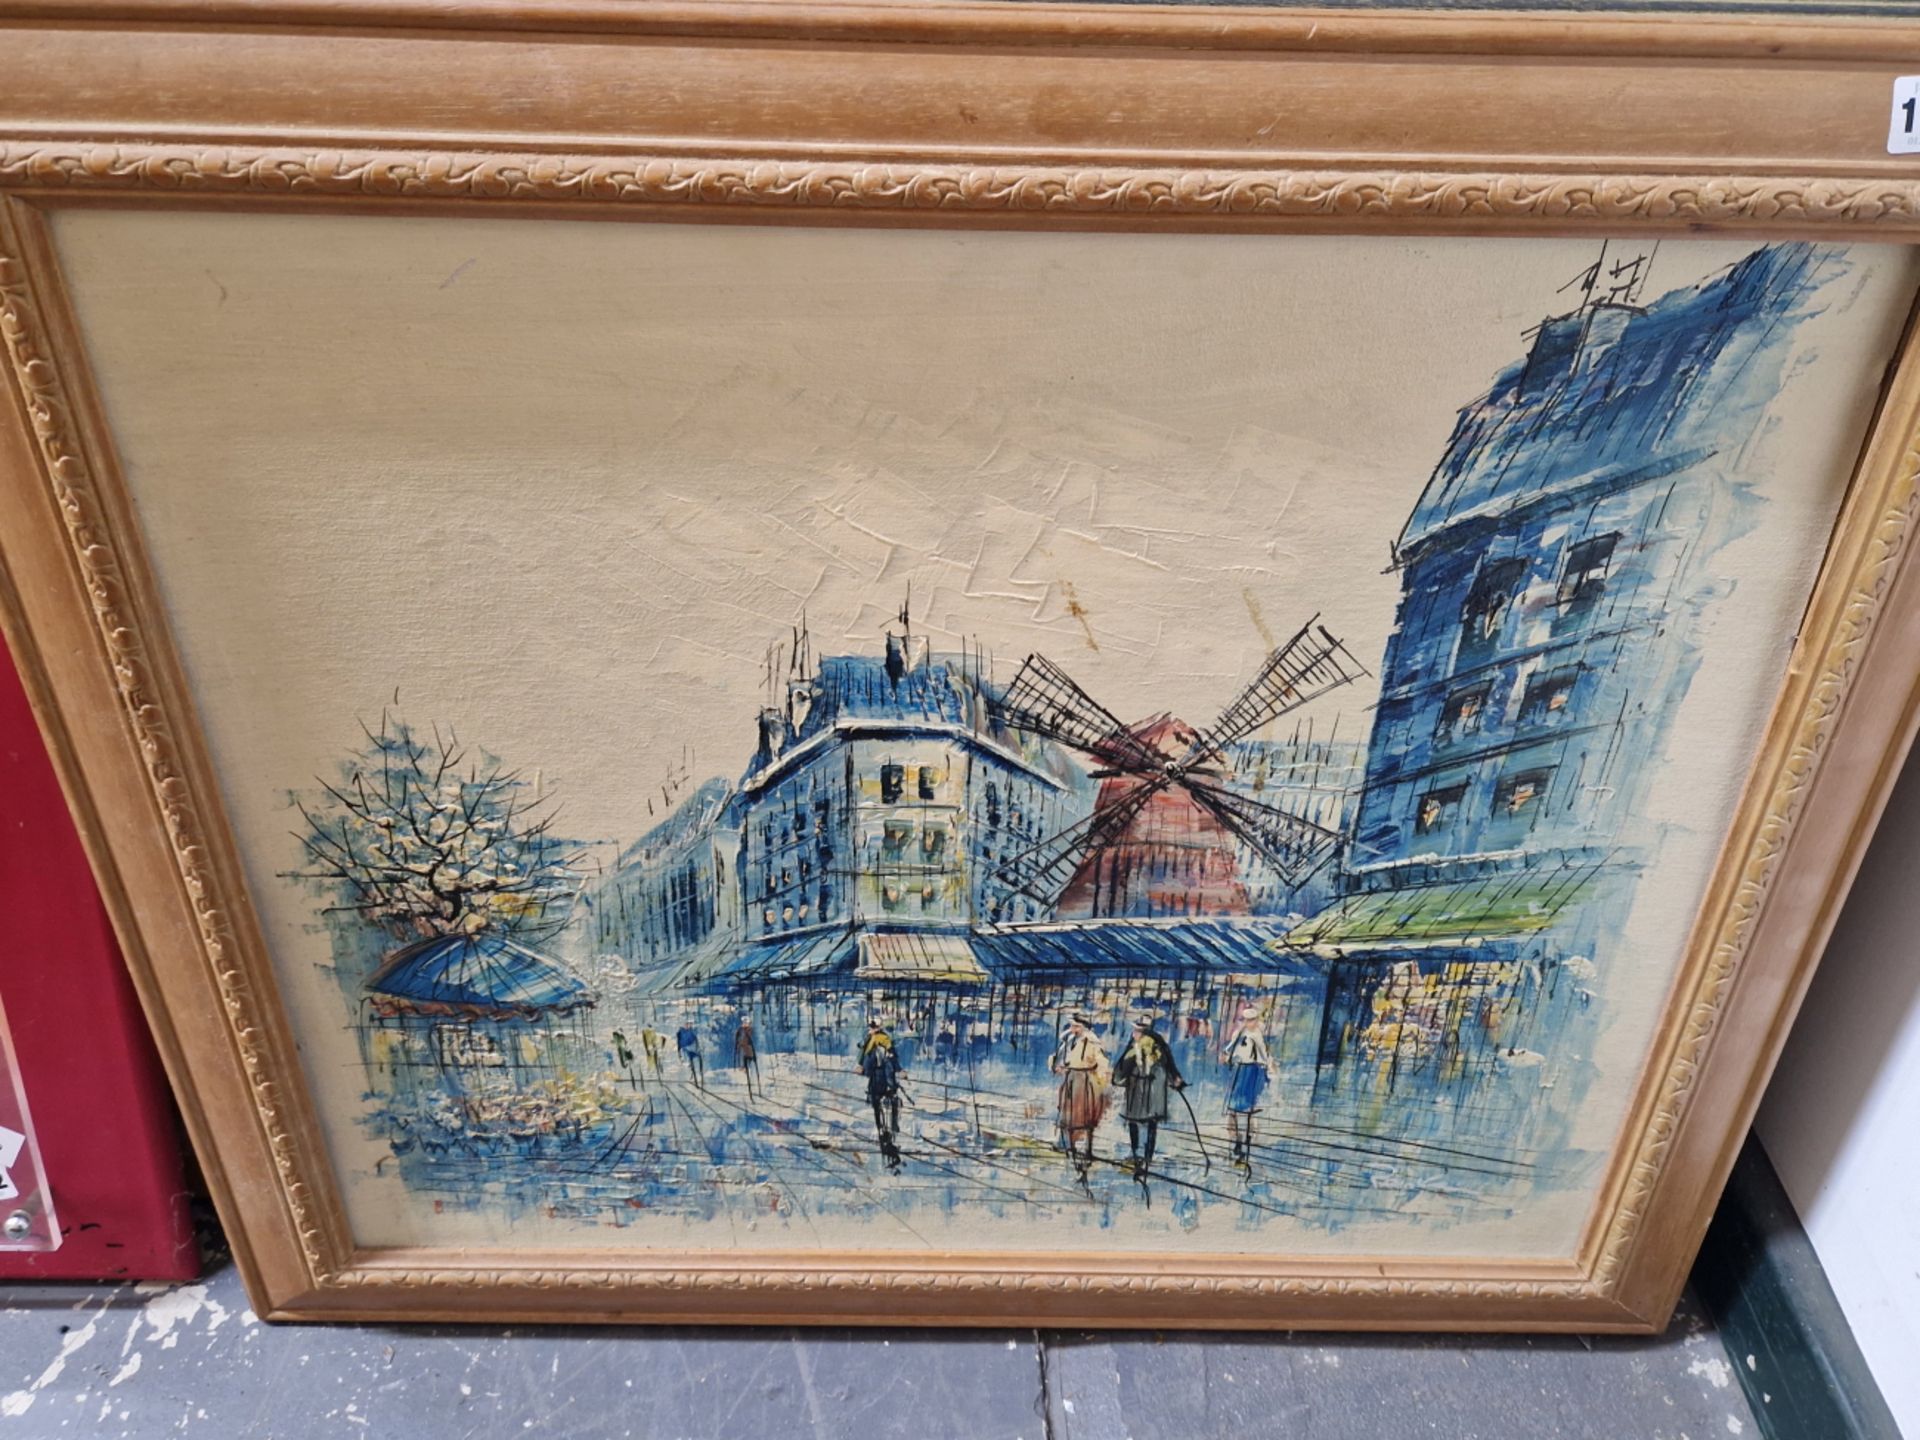 TWO 20th CENTURY LANDSCAPE OIL PAINTINGS OF PARIS SCENES, BOTH SIGNED INDISTINCTLY, OIL ON BOARD. 50 - Image 2 of 6